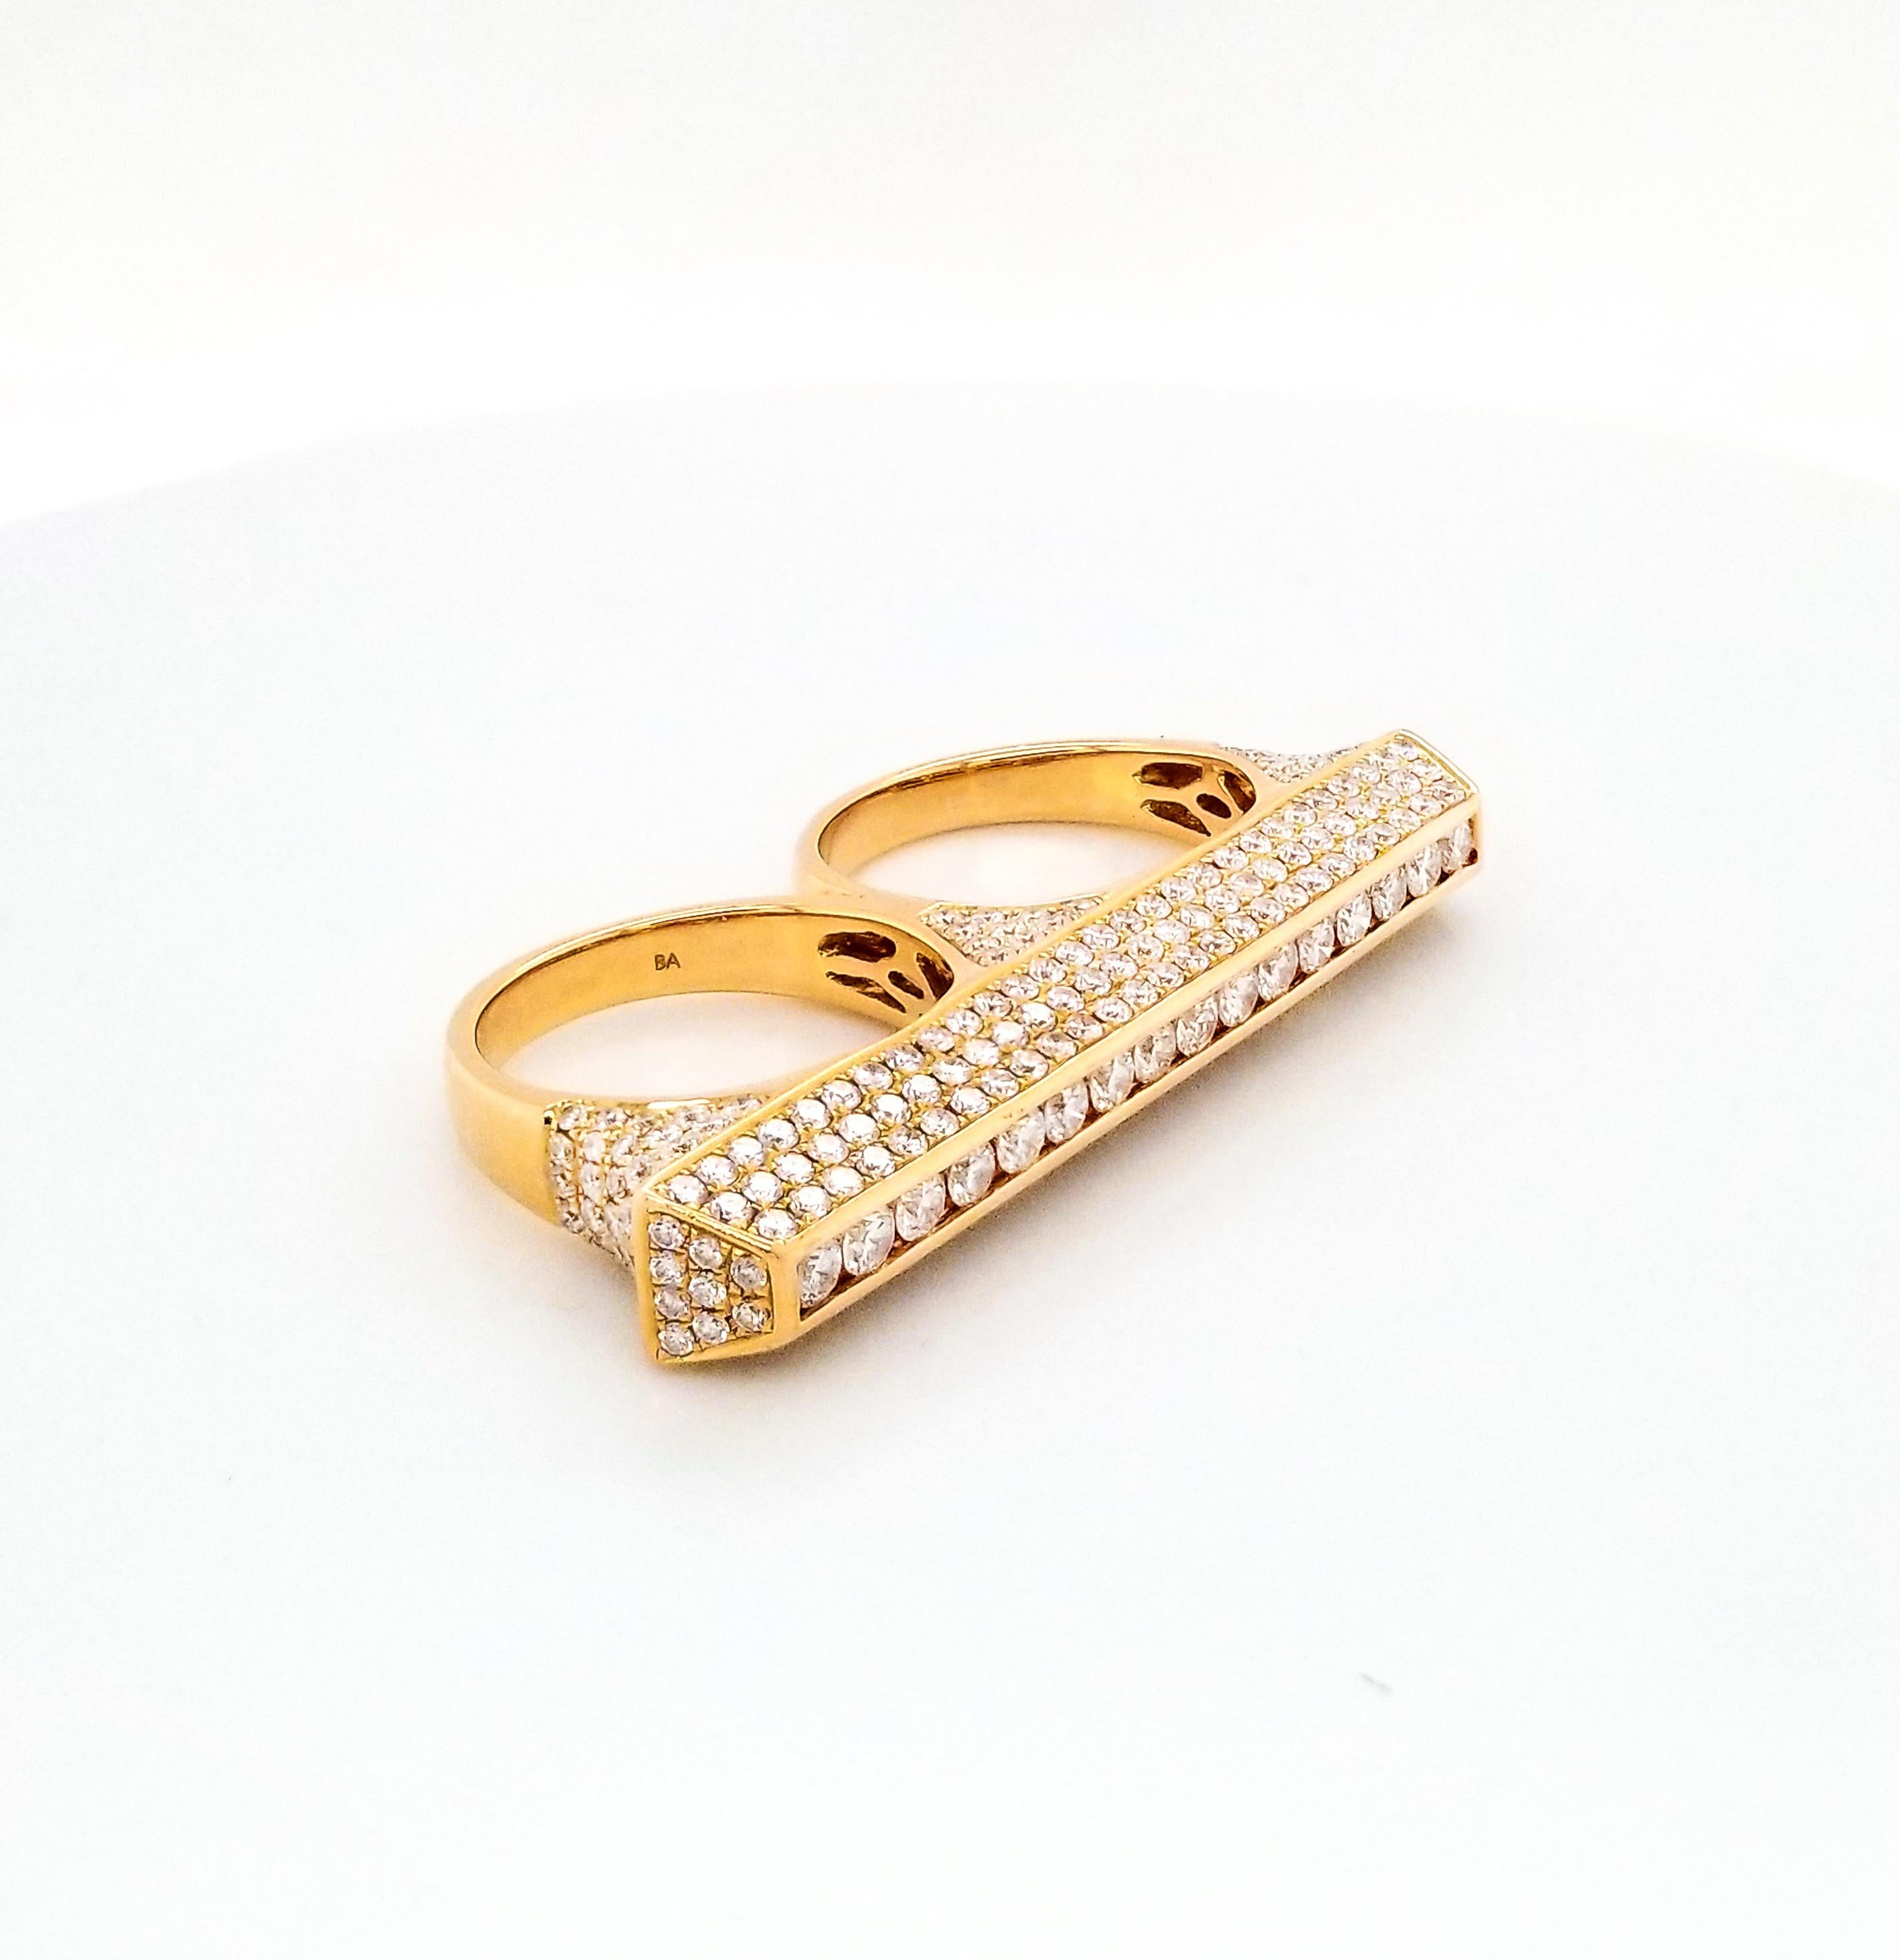 Stylish modern ring that goes on two fingers. 
It is embellished with pave diamonds weighing 3.10 carats and mounted in 18K rose gold.
The weight of gold is 14.26 grams.
The diamonds are equivalent to G-I colors, VS-SI clarity.
Size of the ring is